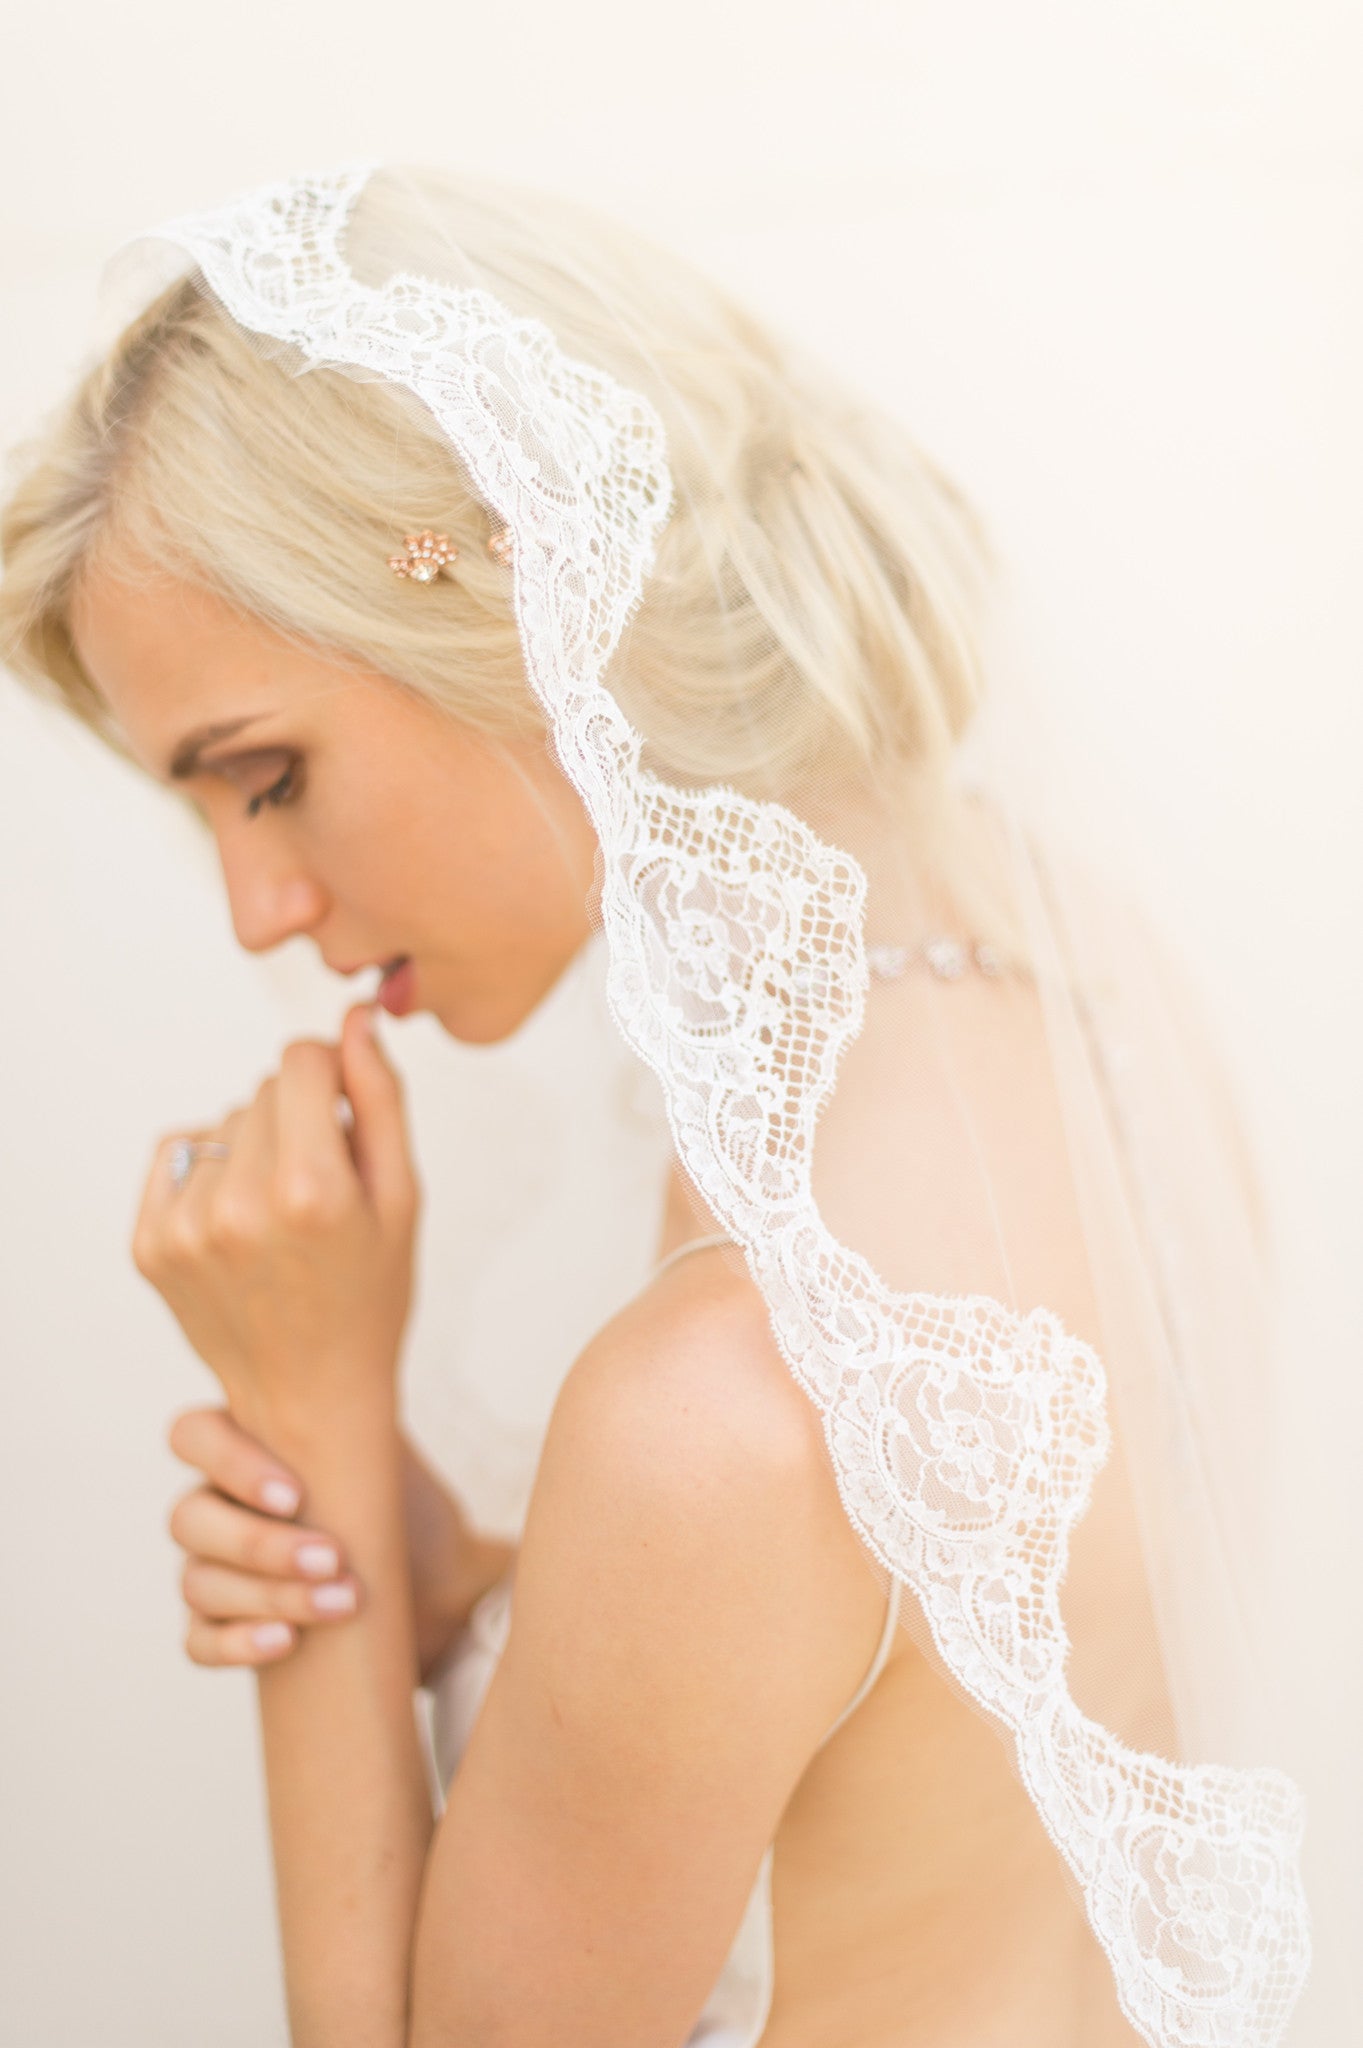 Bridal Accessories and Wedding Jewelry, Camilla Christine, Veil, Giselle, Ivory, Spanish Mantllia Veil with French Chantilly Scallop Lace Trim 